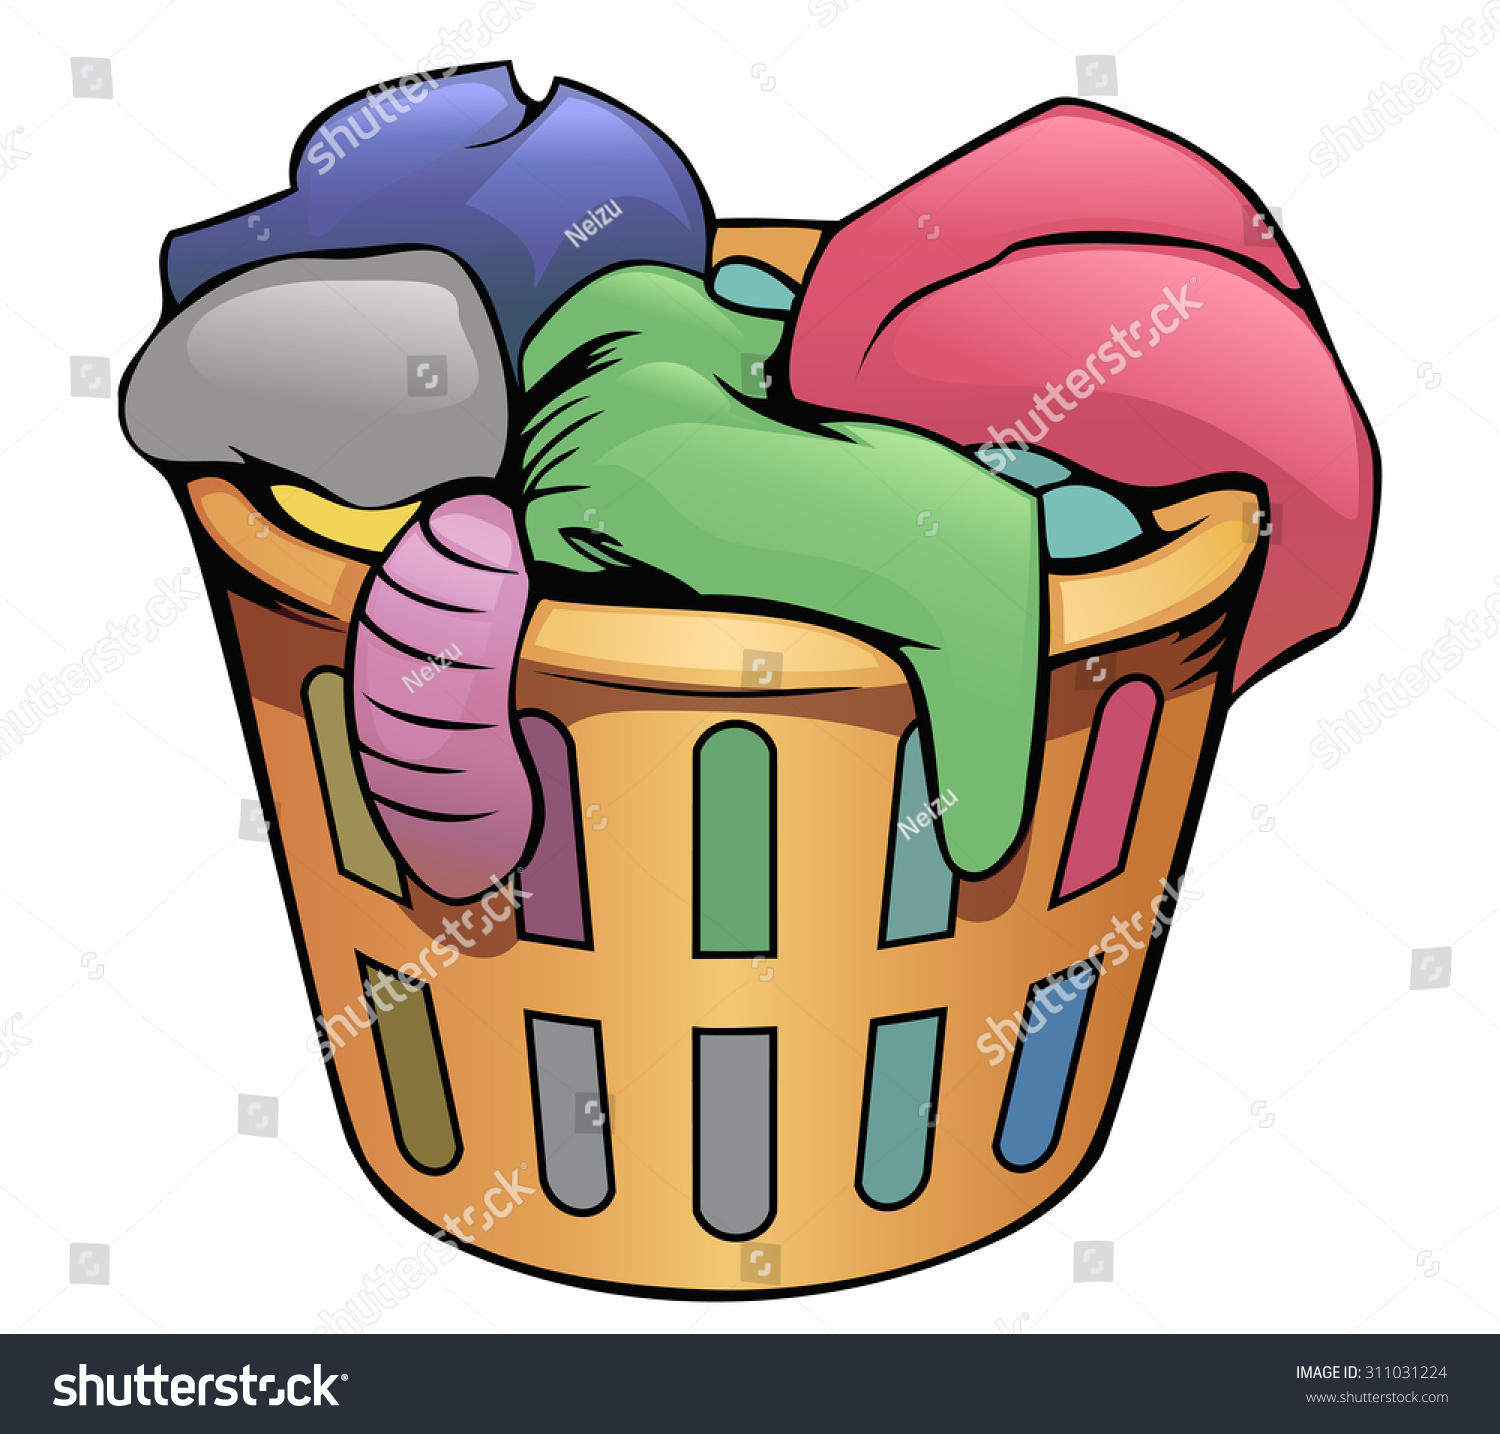 clipart dirty clothes - photo #15